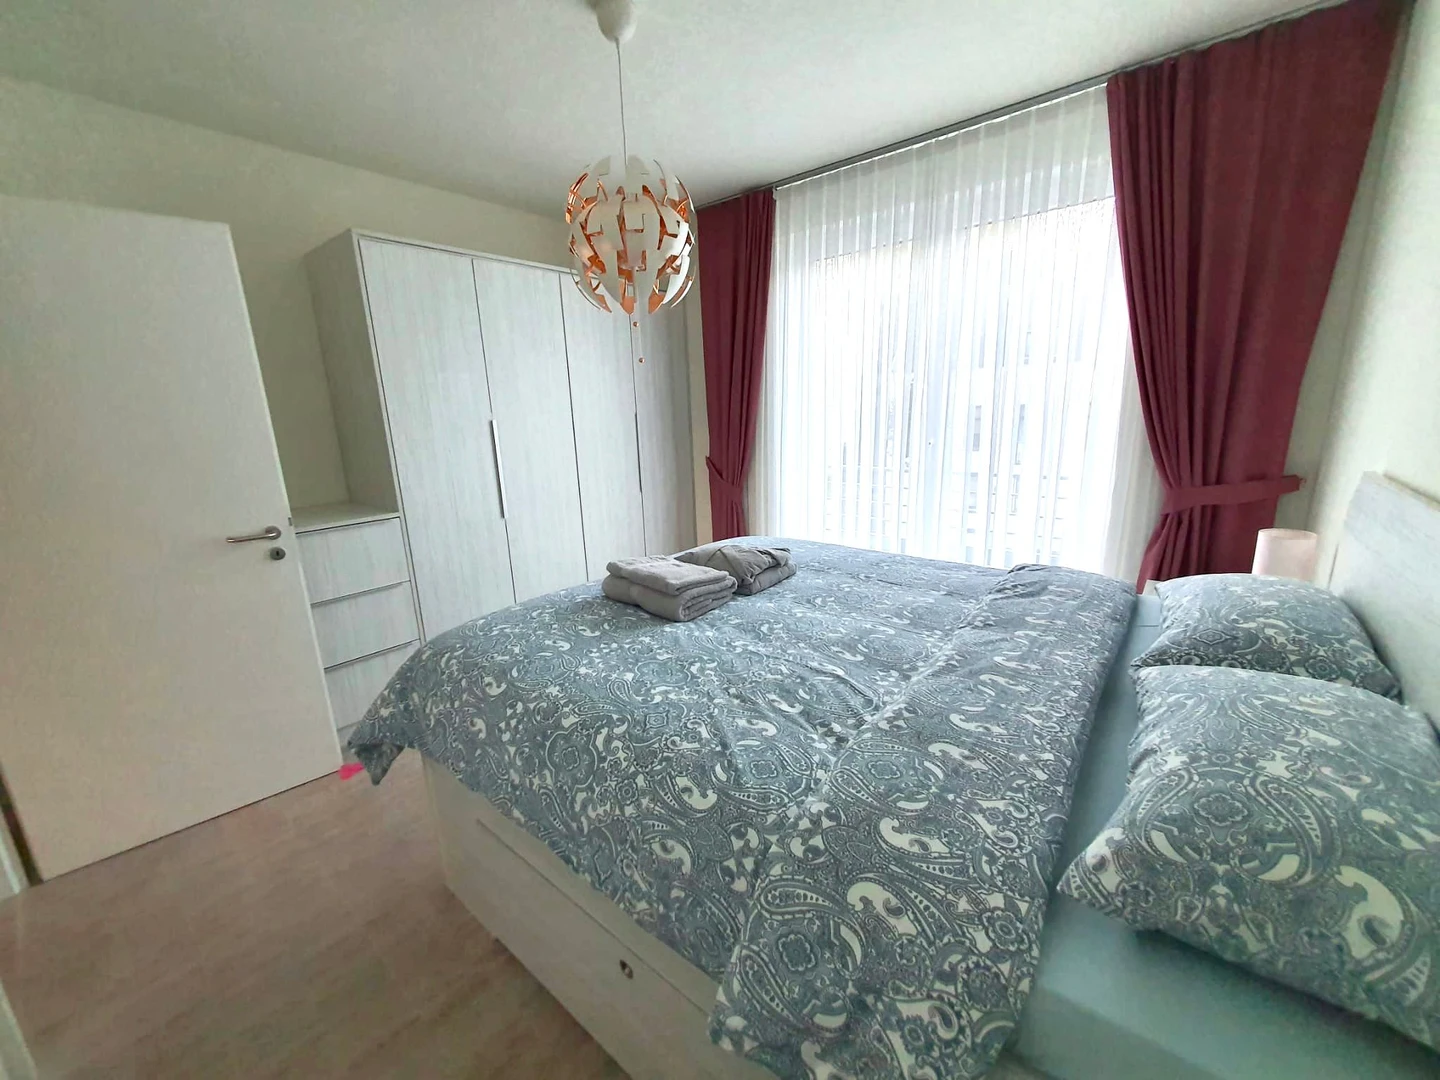 Room for rent with double bed Mülheim An Der Ruhr